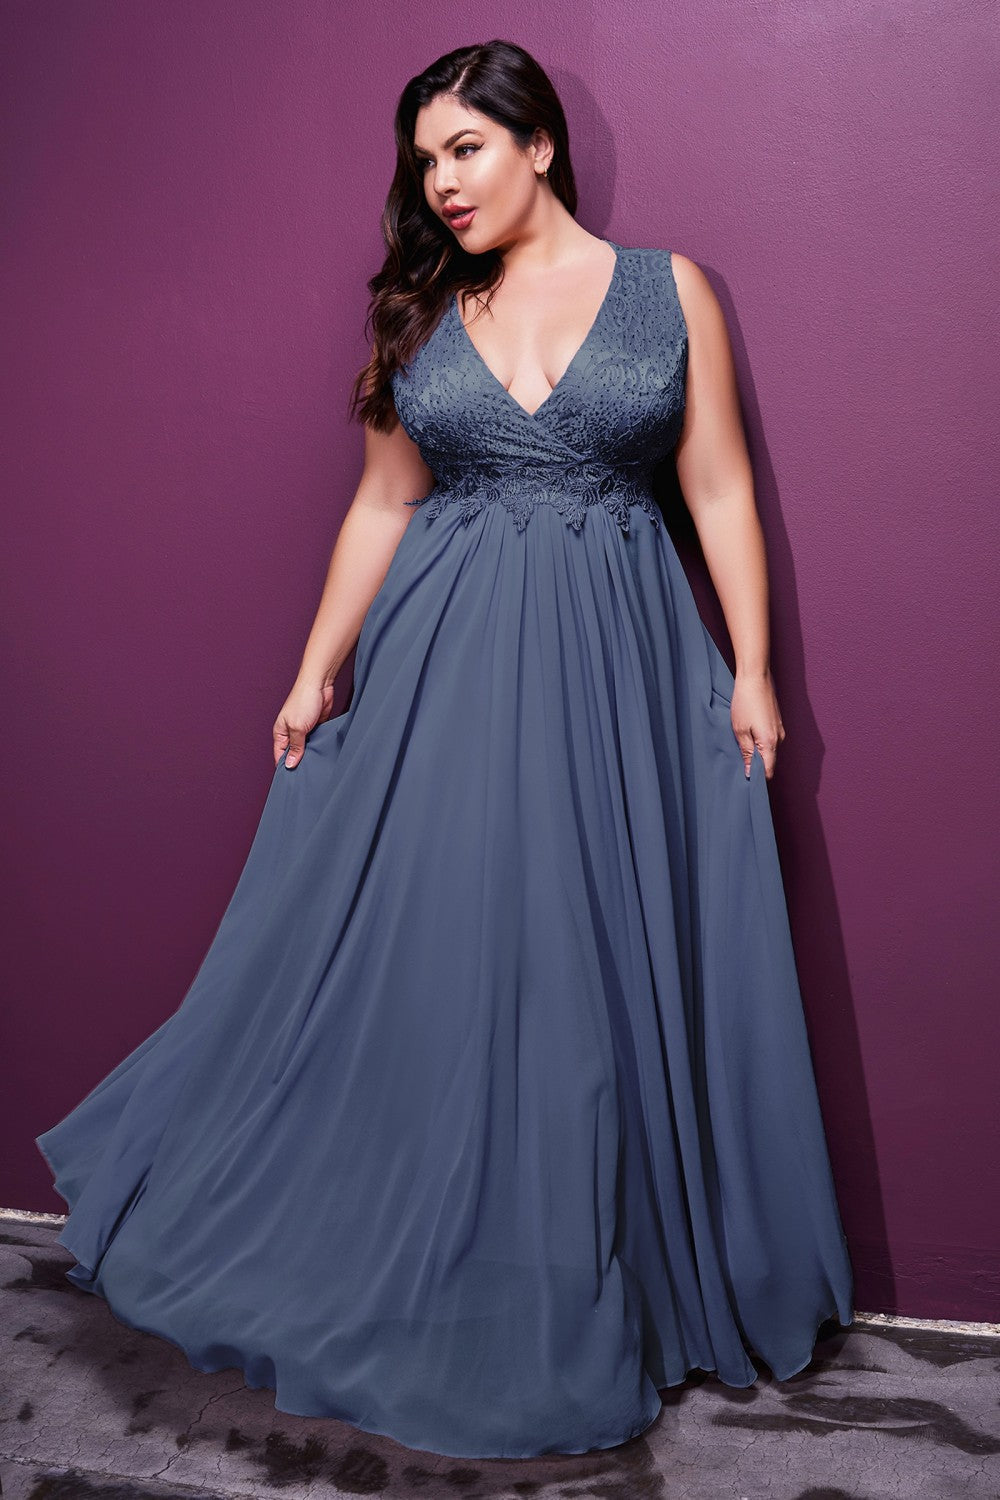 A-line Curve Chiffon Prom & Bridesmaid Dress Evening Plus Size Charming Tender Gown Laced Vintage V-neck Tank Strap Bodice CDS7201 Sale Elsy Style All Dresses